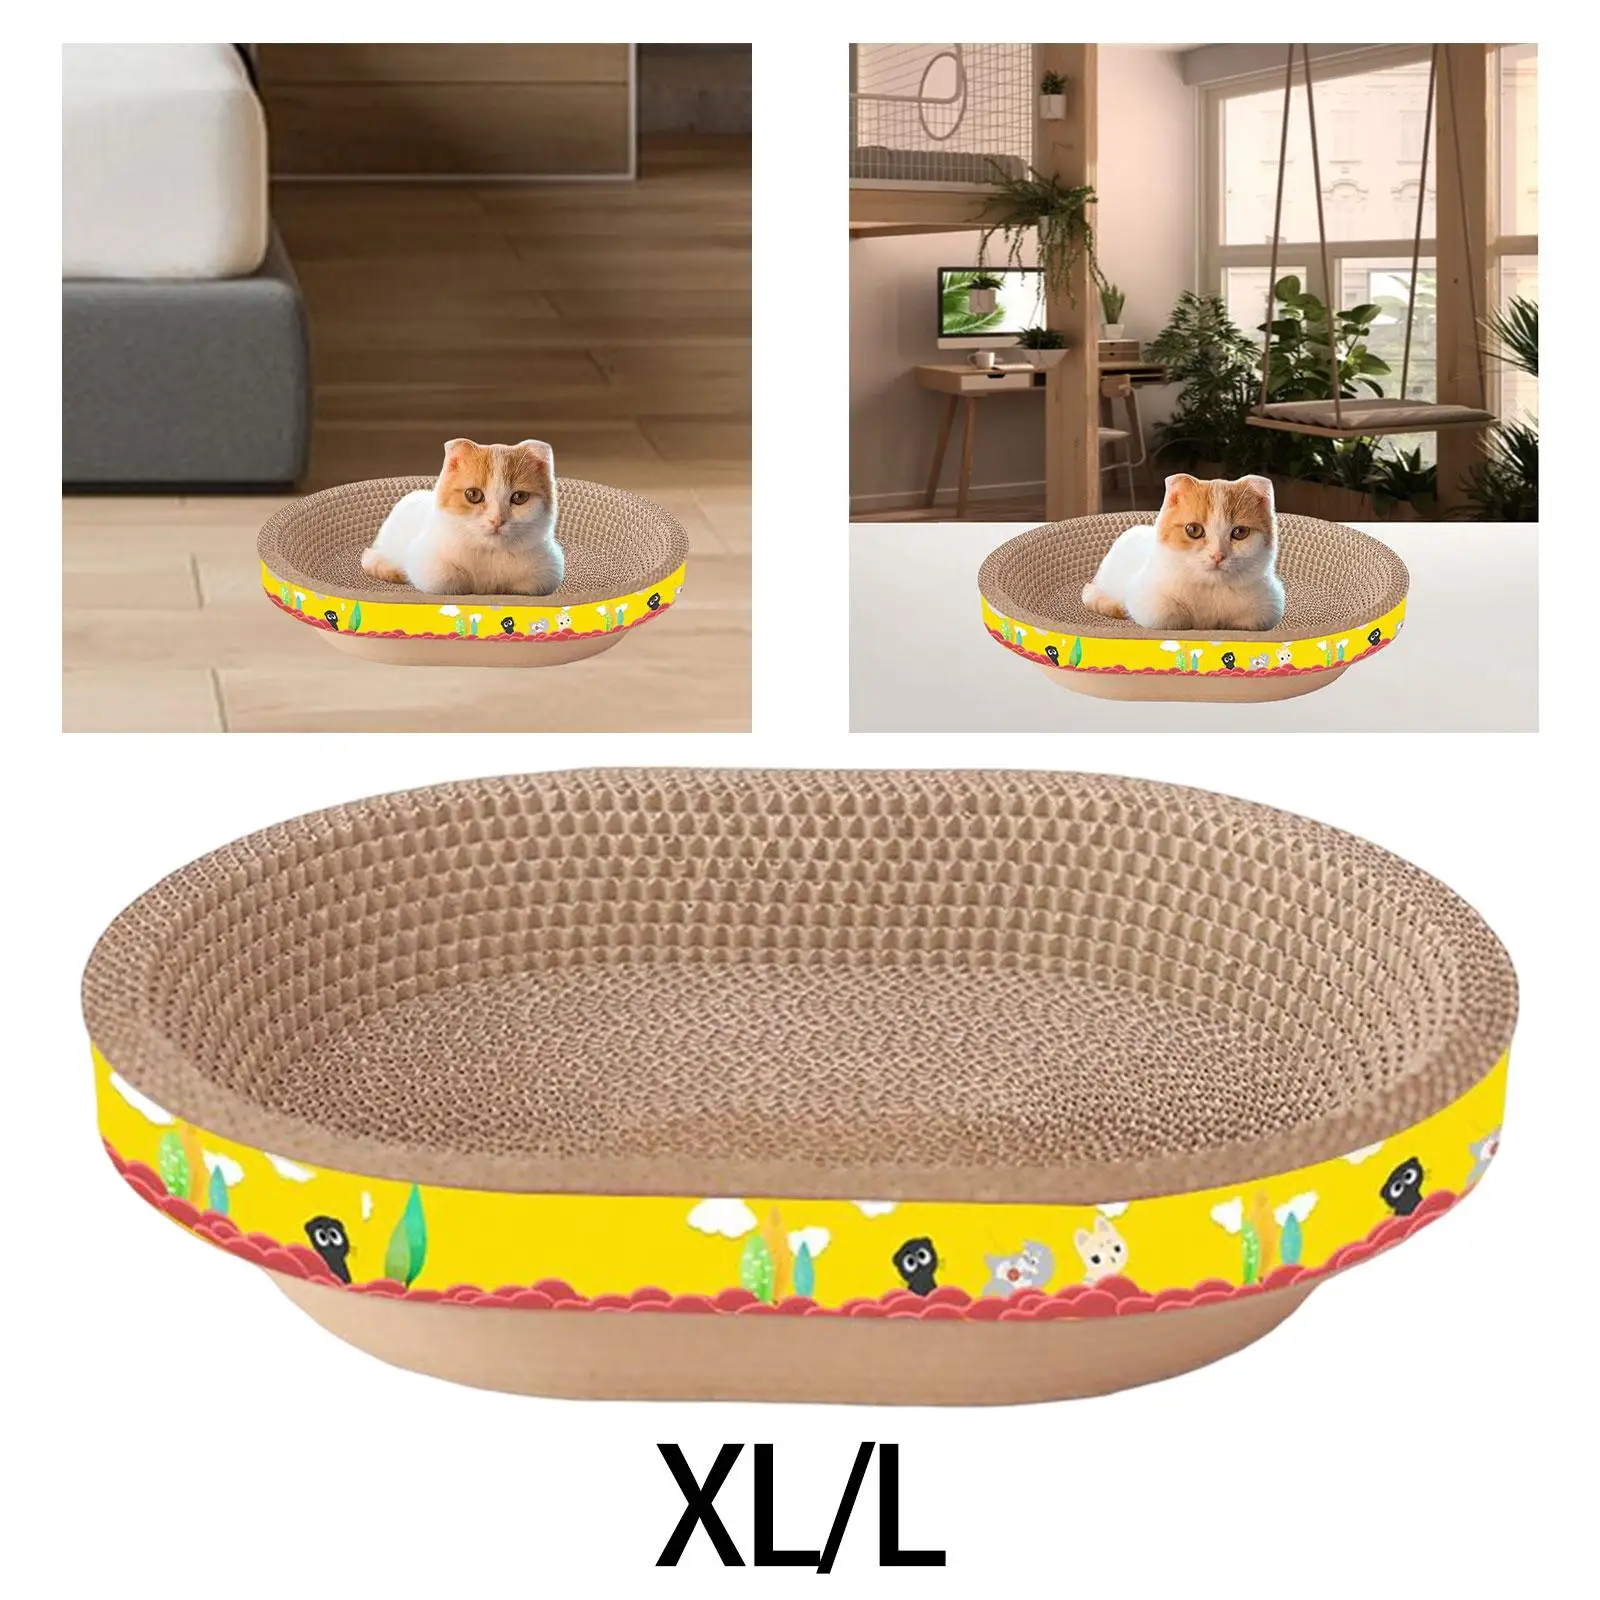 Pet Cat Scratcher Oval Cat Scratch scatching Toy Furniture Protection Recyclable